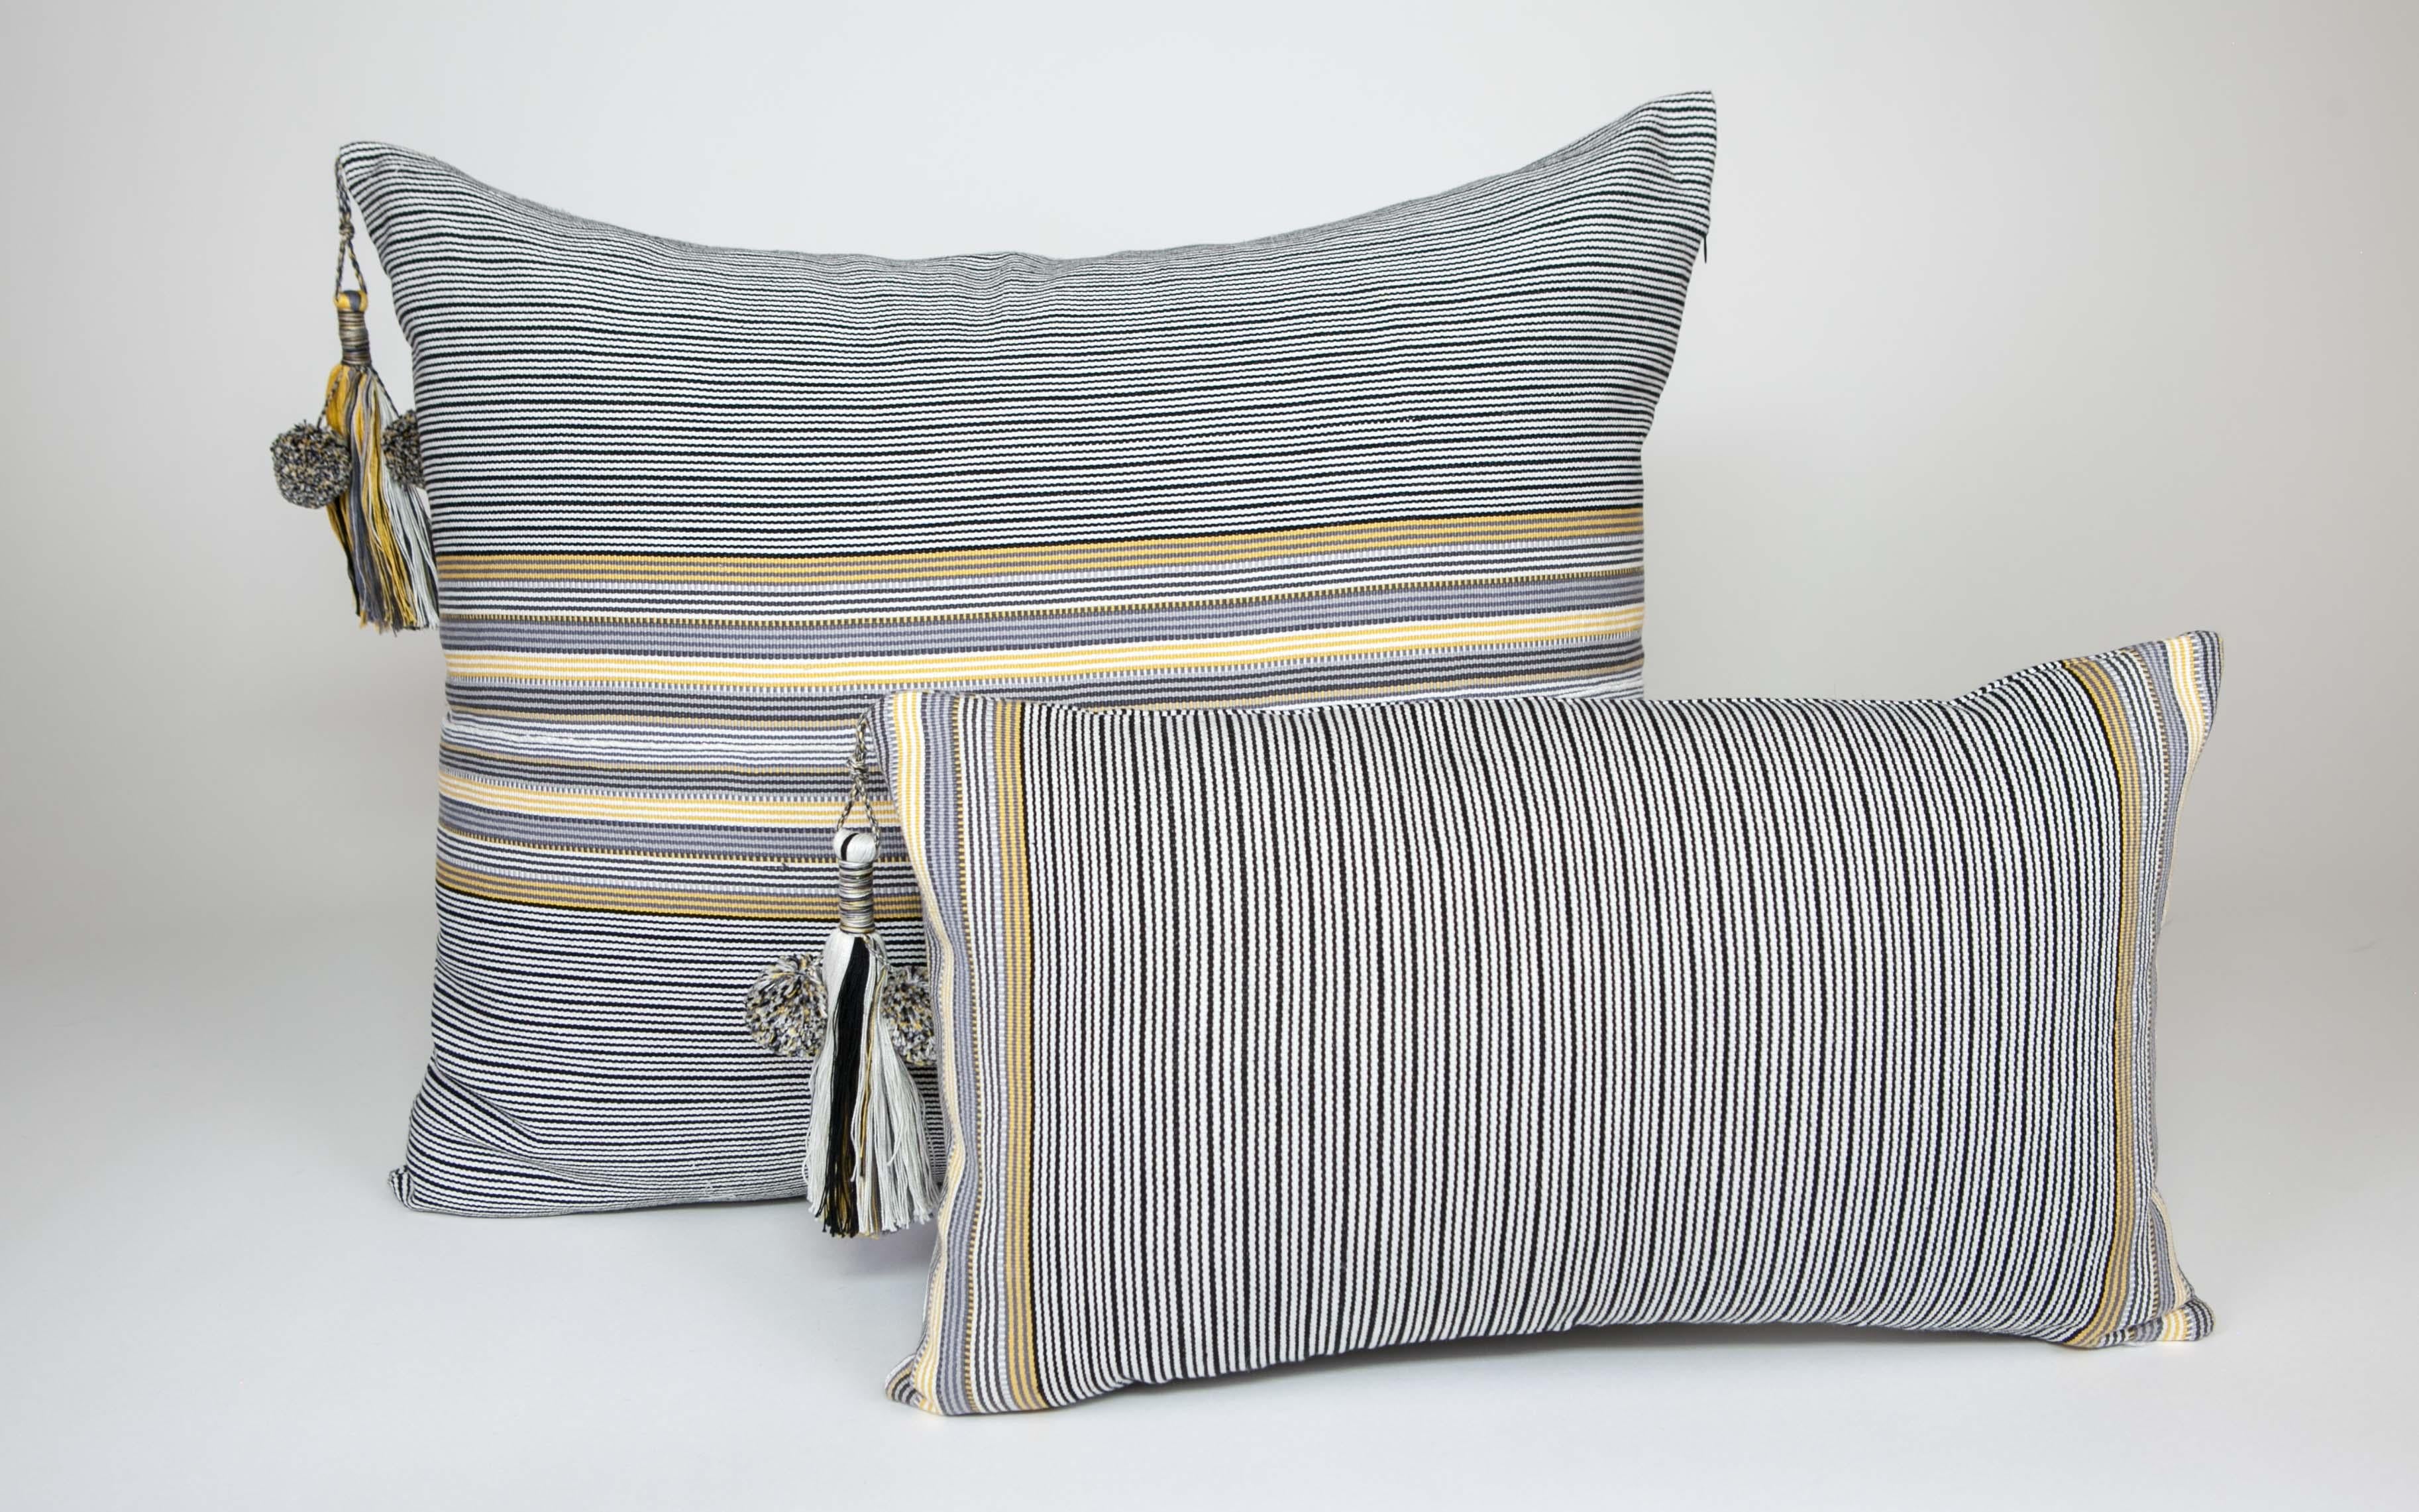 These delightful pillows are made in the Nachig municipality of Zinacantan, Chiapas, Mexico, an area that has been characterized by their finely woven striped ponchos and huipiles, these pillows are created on back strap looms using age old methods